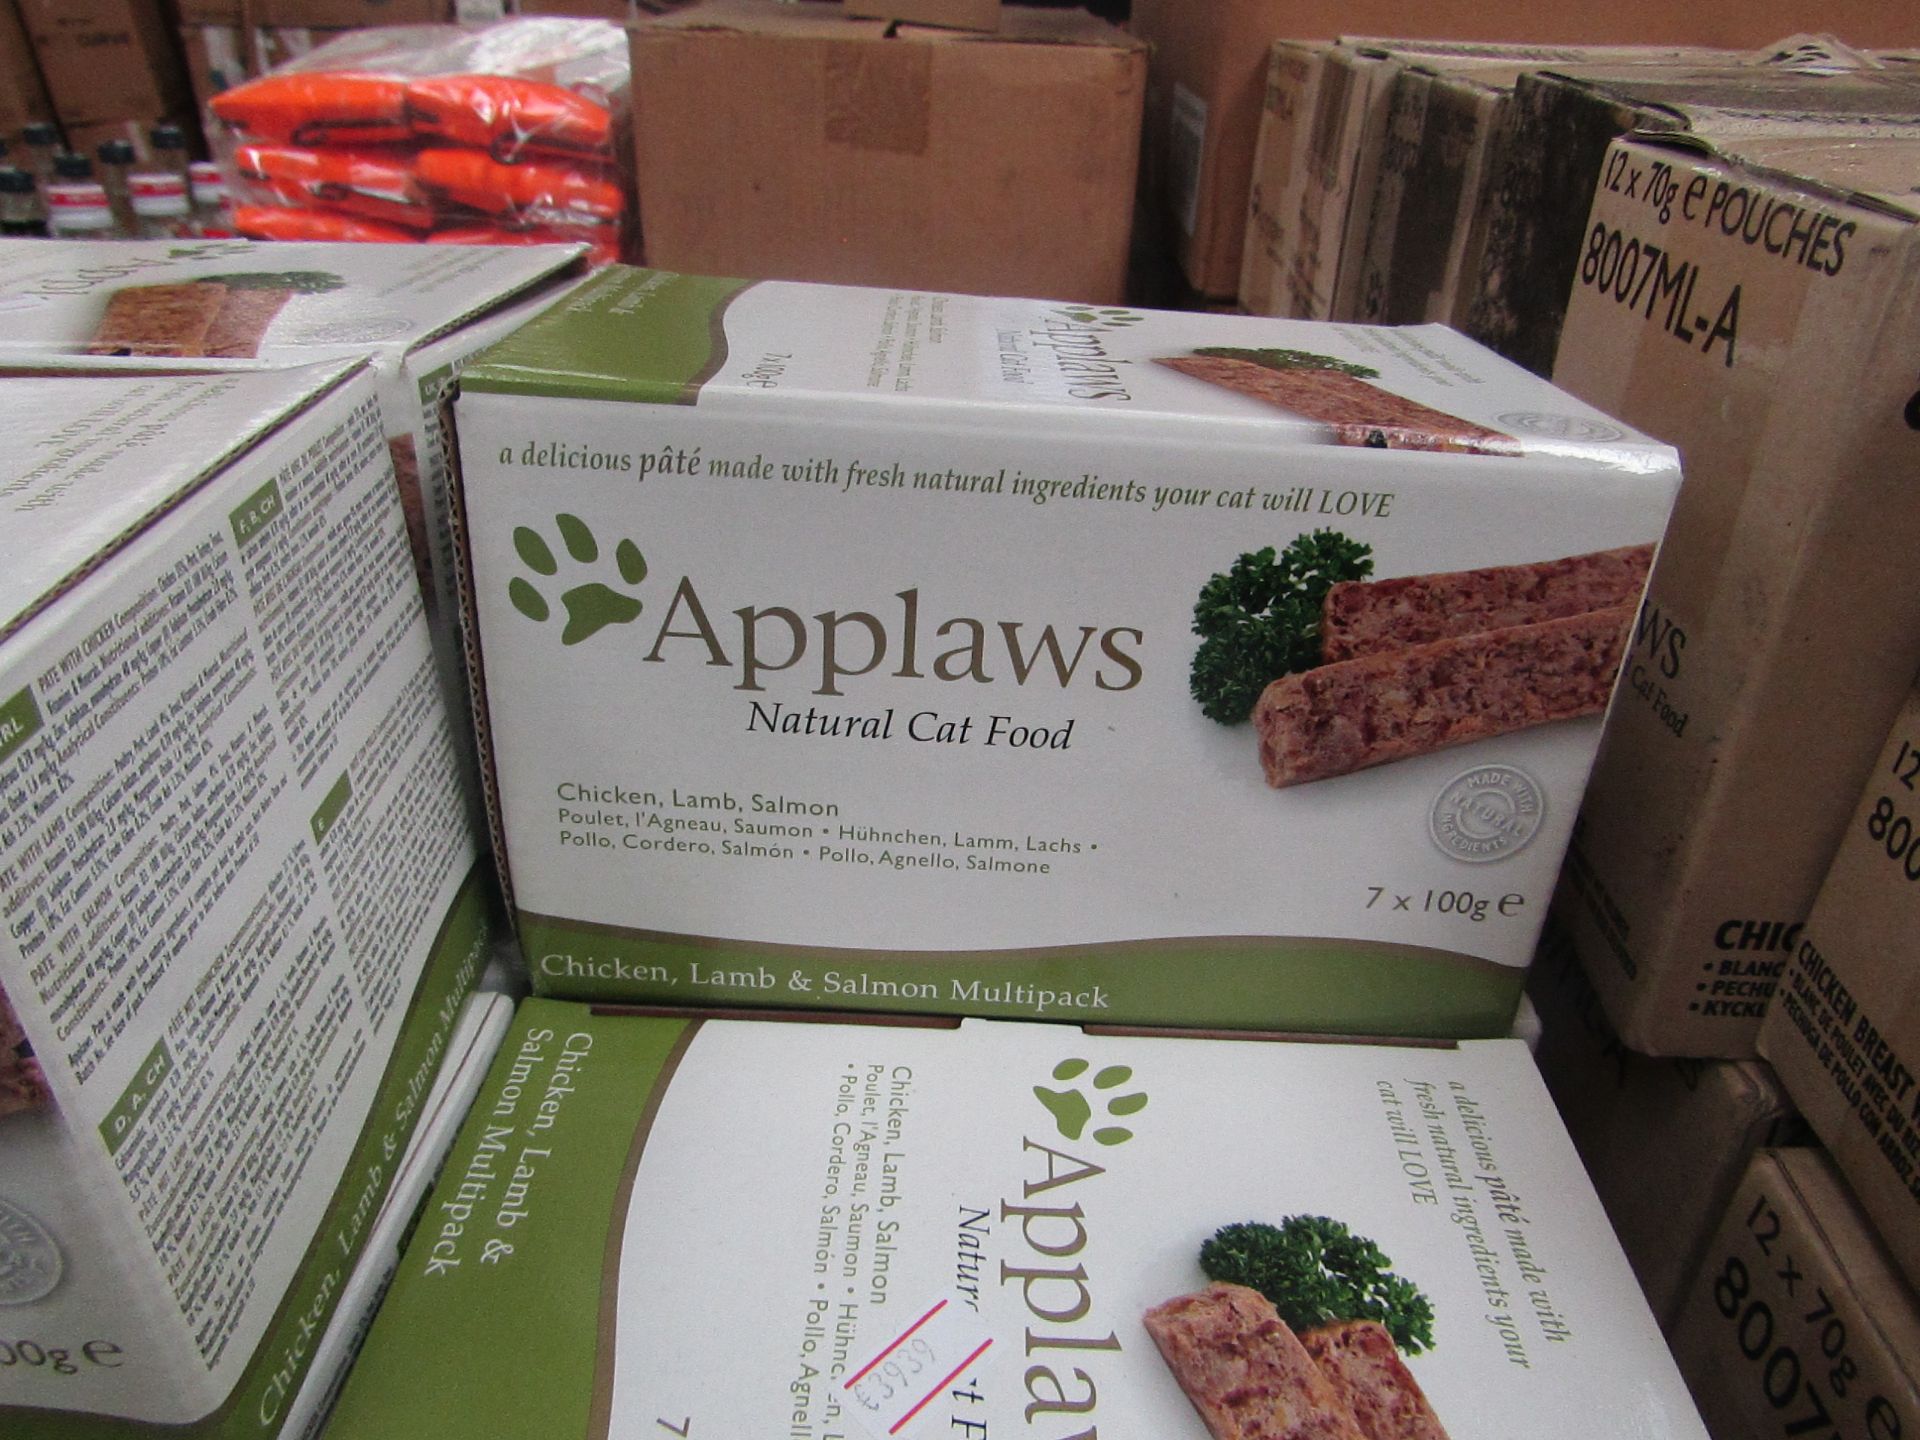 Applaws - Chicken, Lamb & Salmon Multi-pack Natural Cat Food (7x 100g Pouches) - BBD 2022.